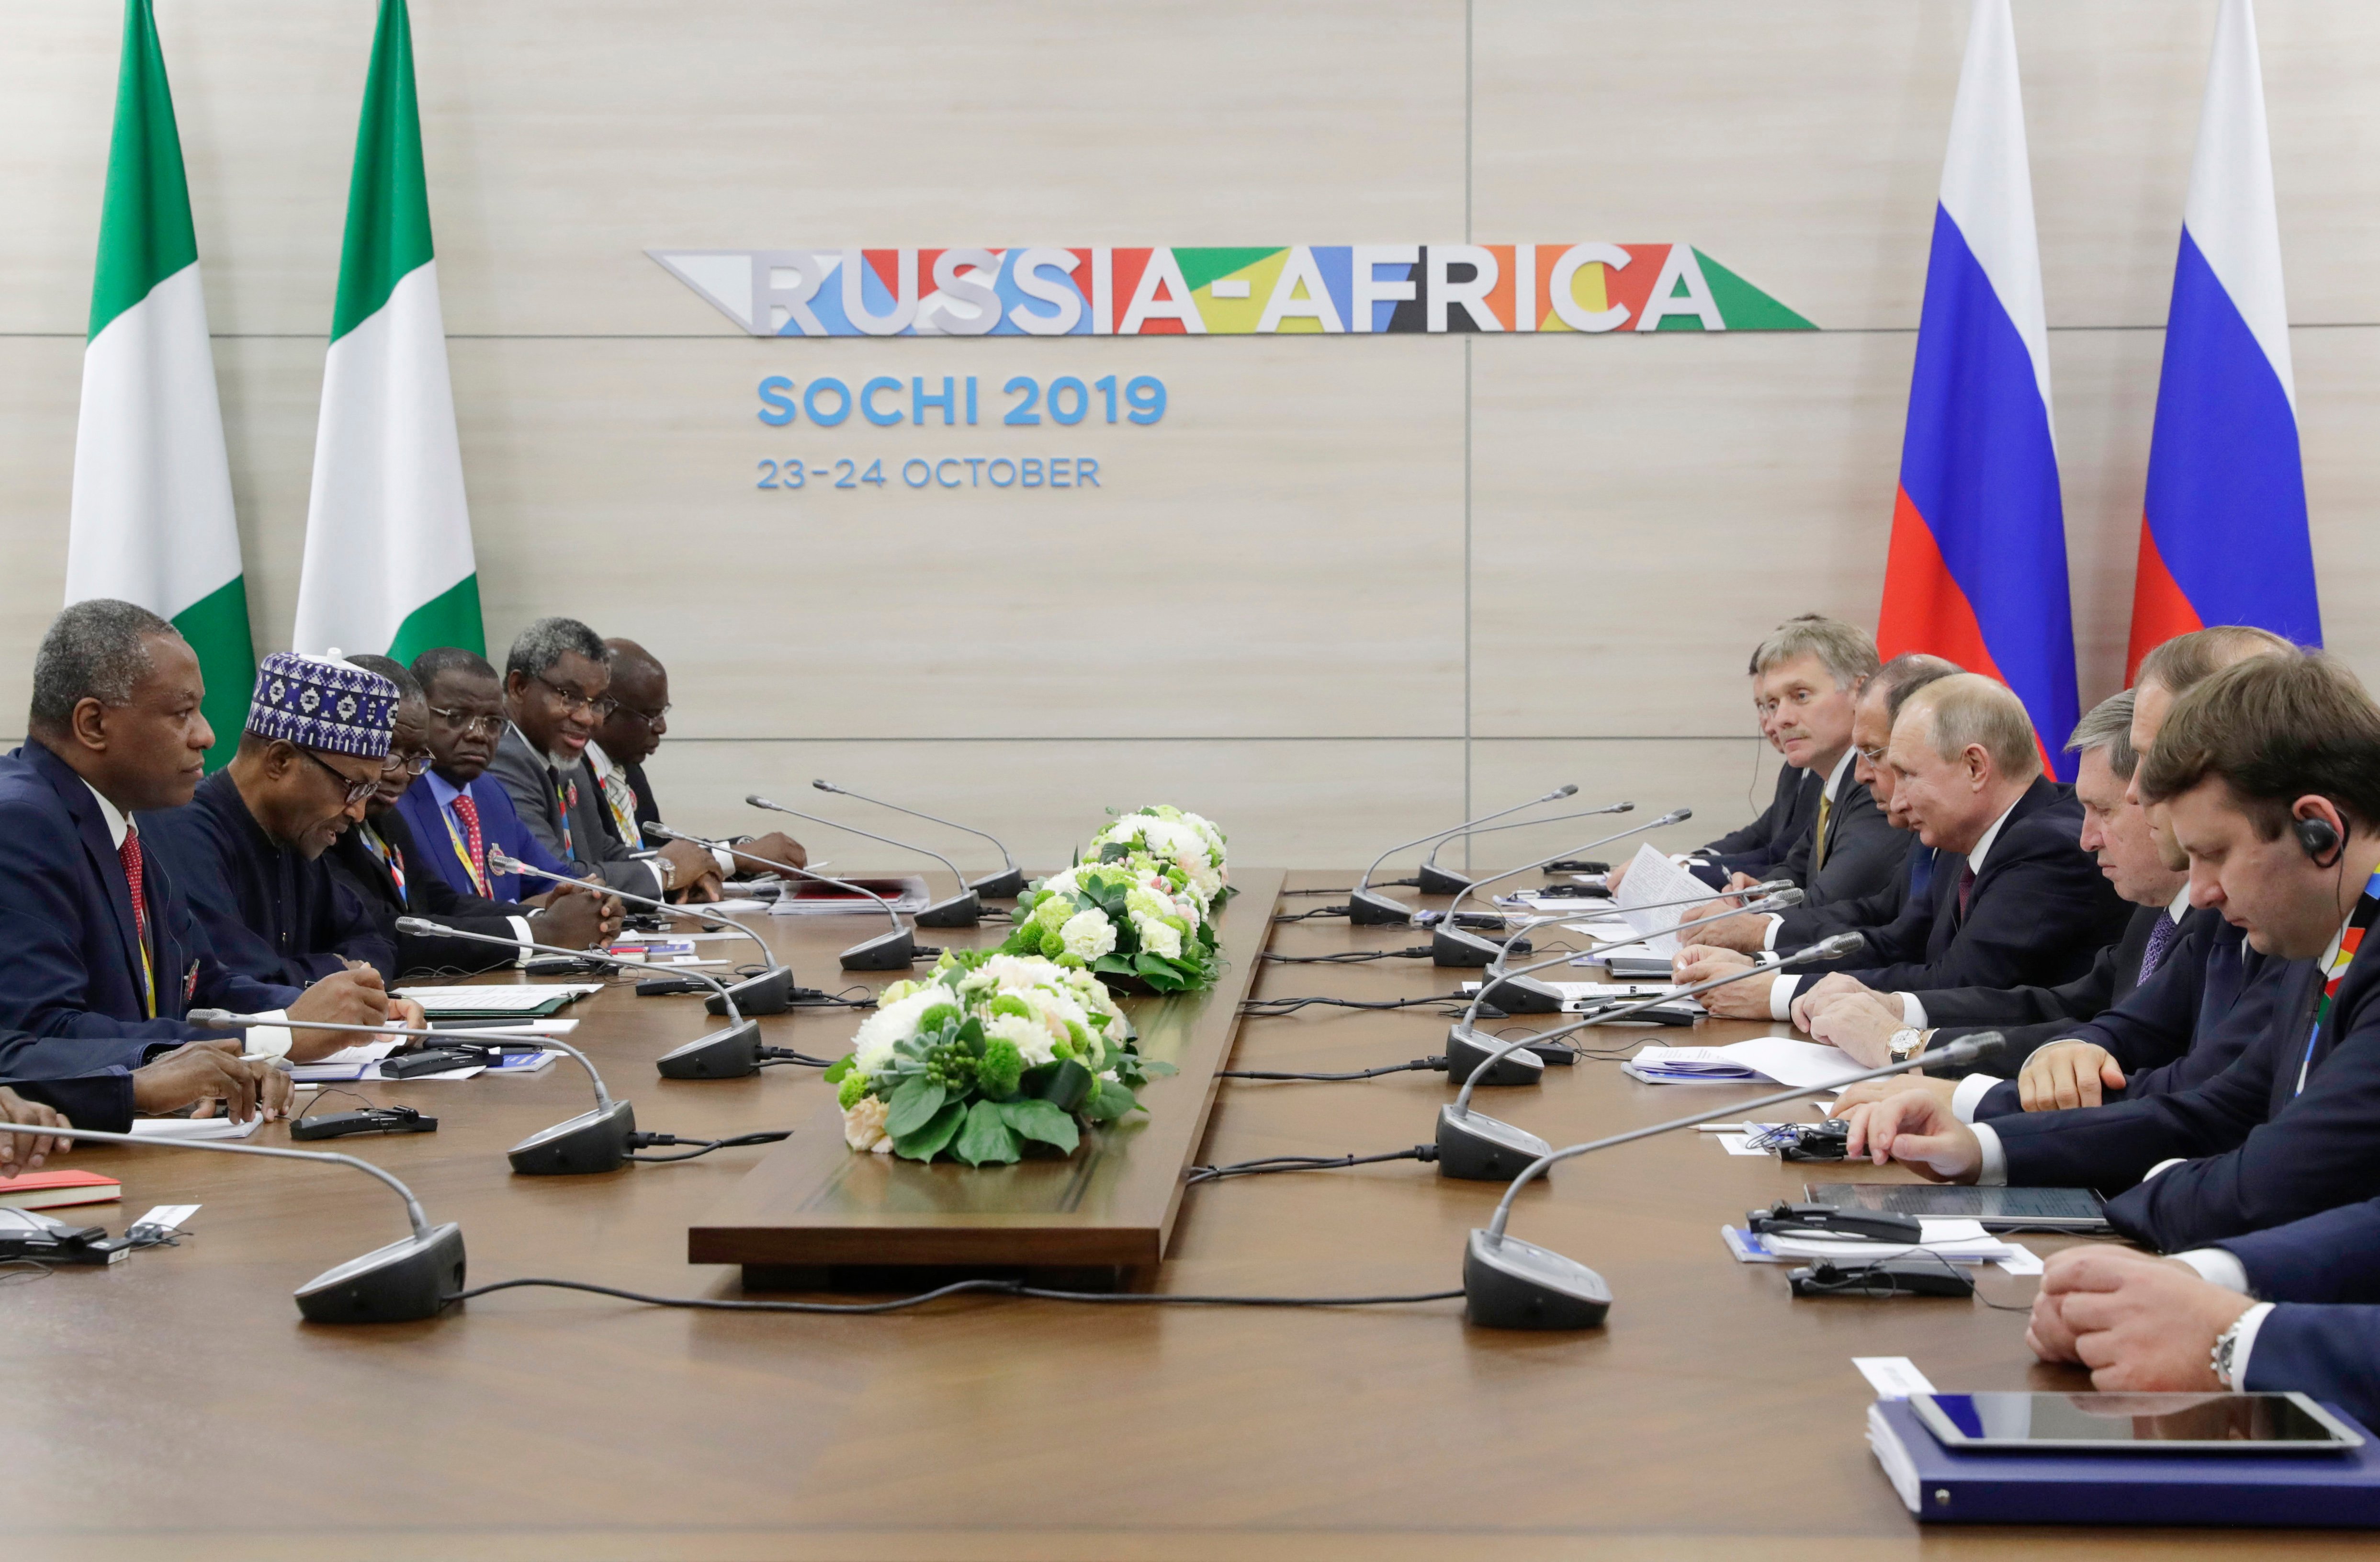 Russian President Vladimir Putin (4R) meets with Nigeria's President Muhammadu Buhari (2L) on the sidelines of the 2019 Russia-Africa Summit in Sochi on October 23, 2019. (Photo by MIKHAIL METZEL/SPUTNIK/AFP via Getty Images)